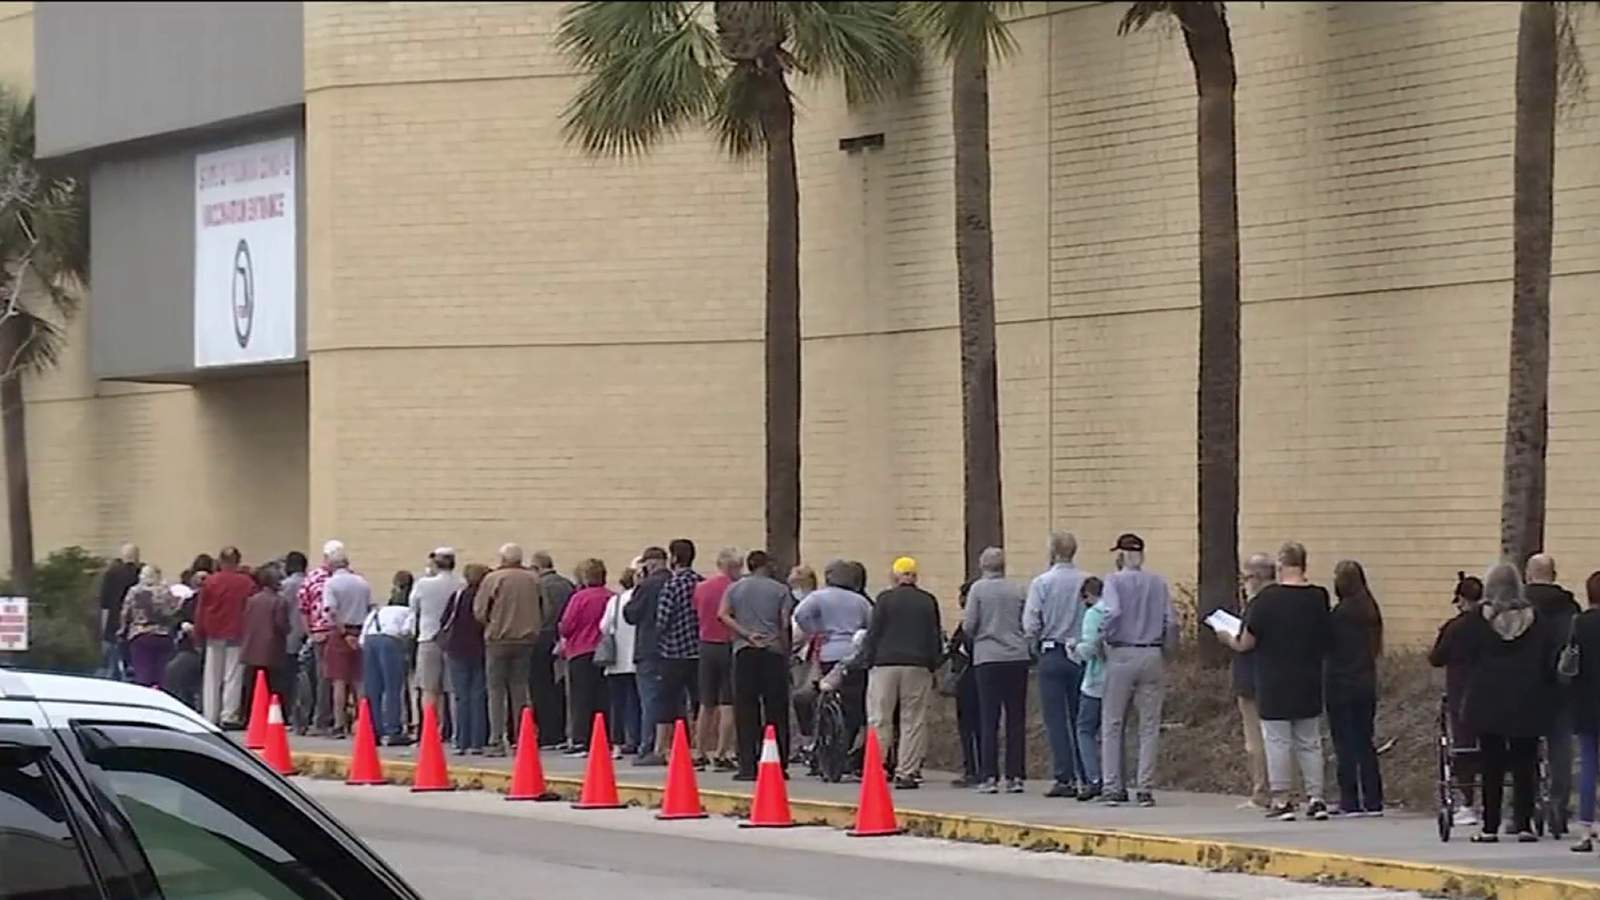 As second doses begin, long line forms at Regency Square vaccine site